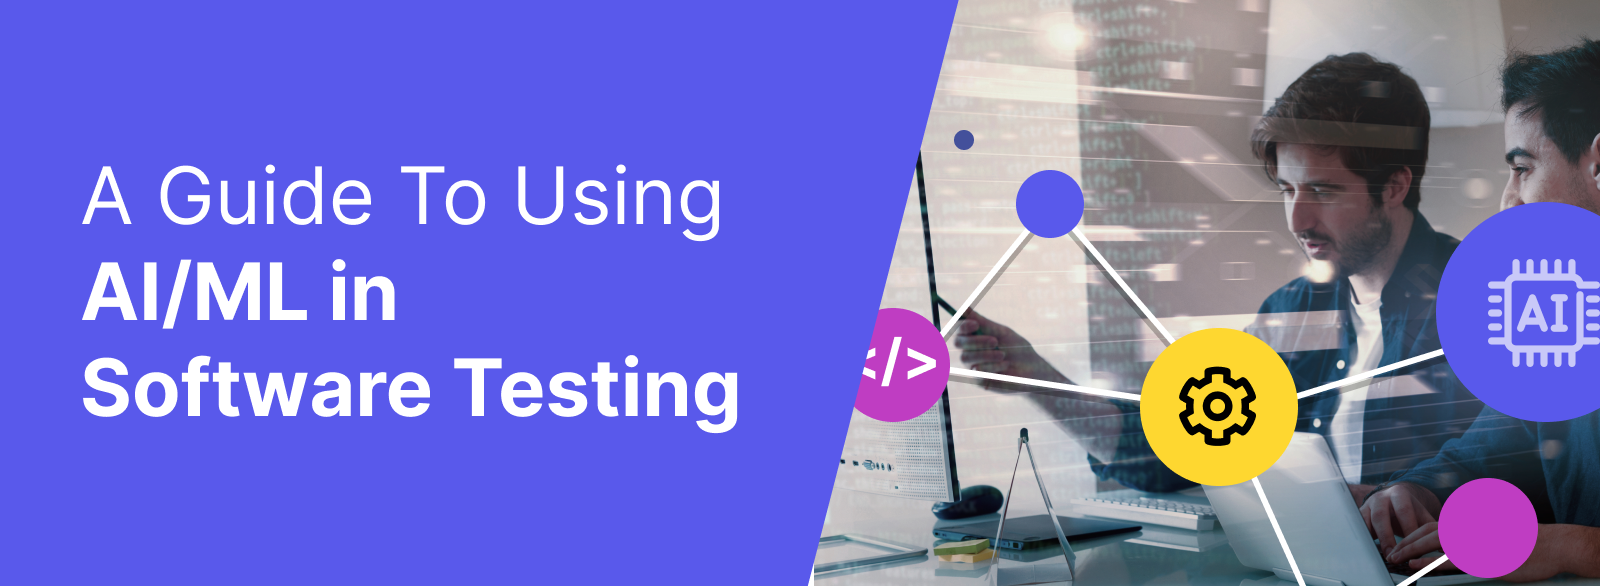 A Guide To Using AI/ML in Software Testing | Katalon